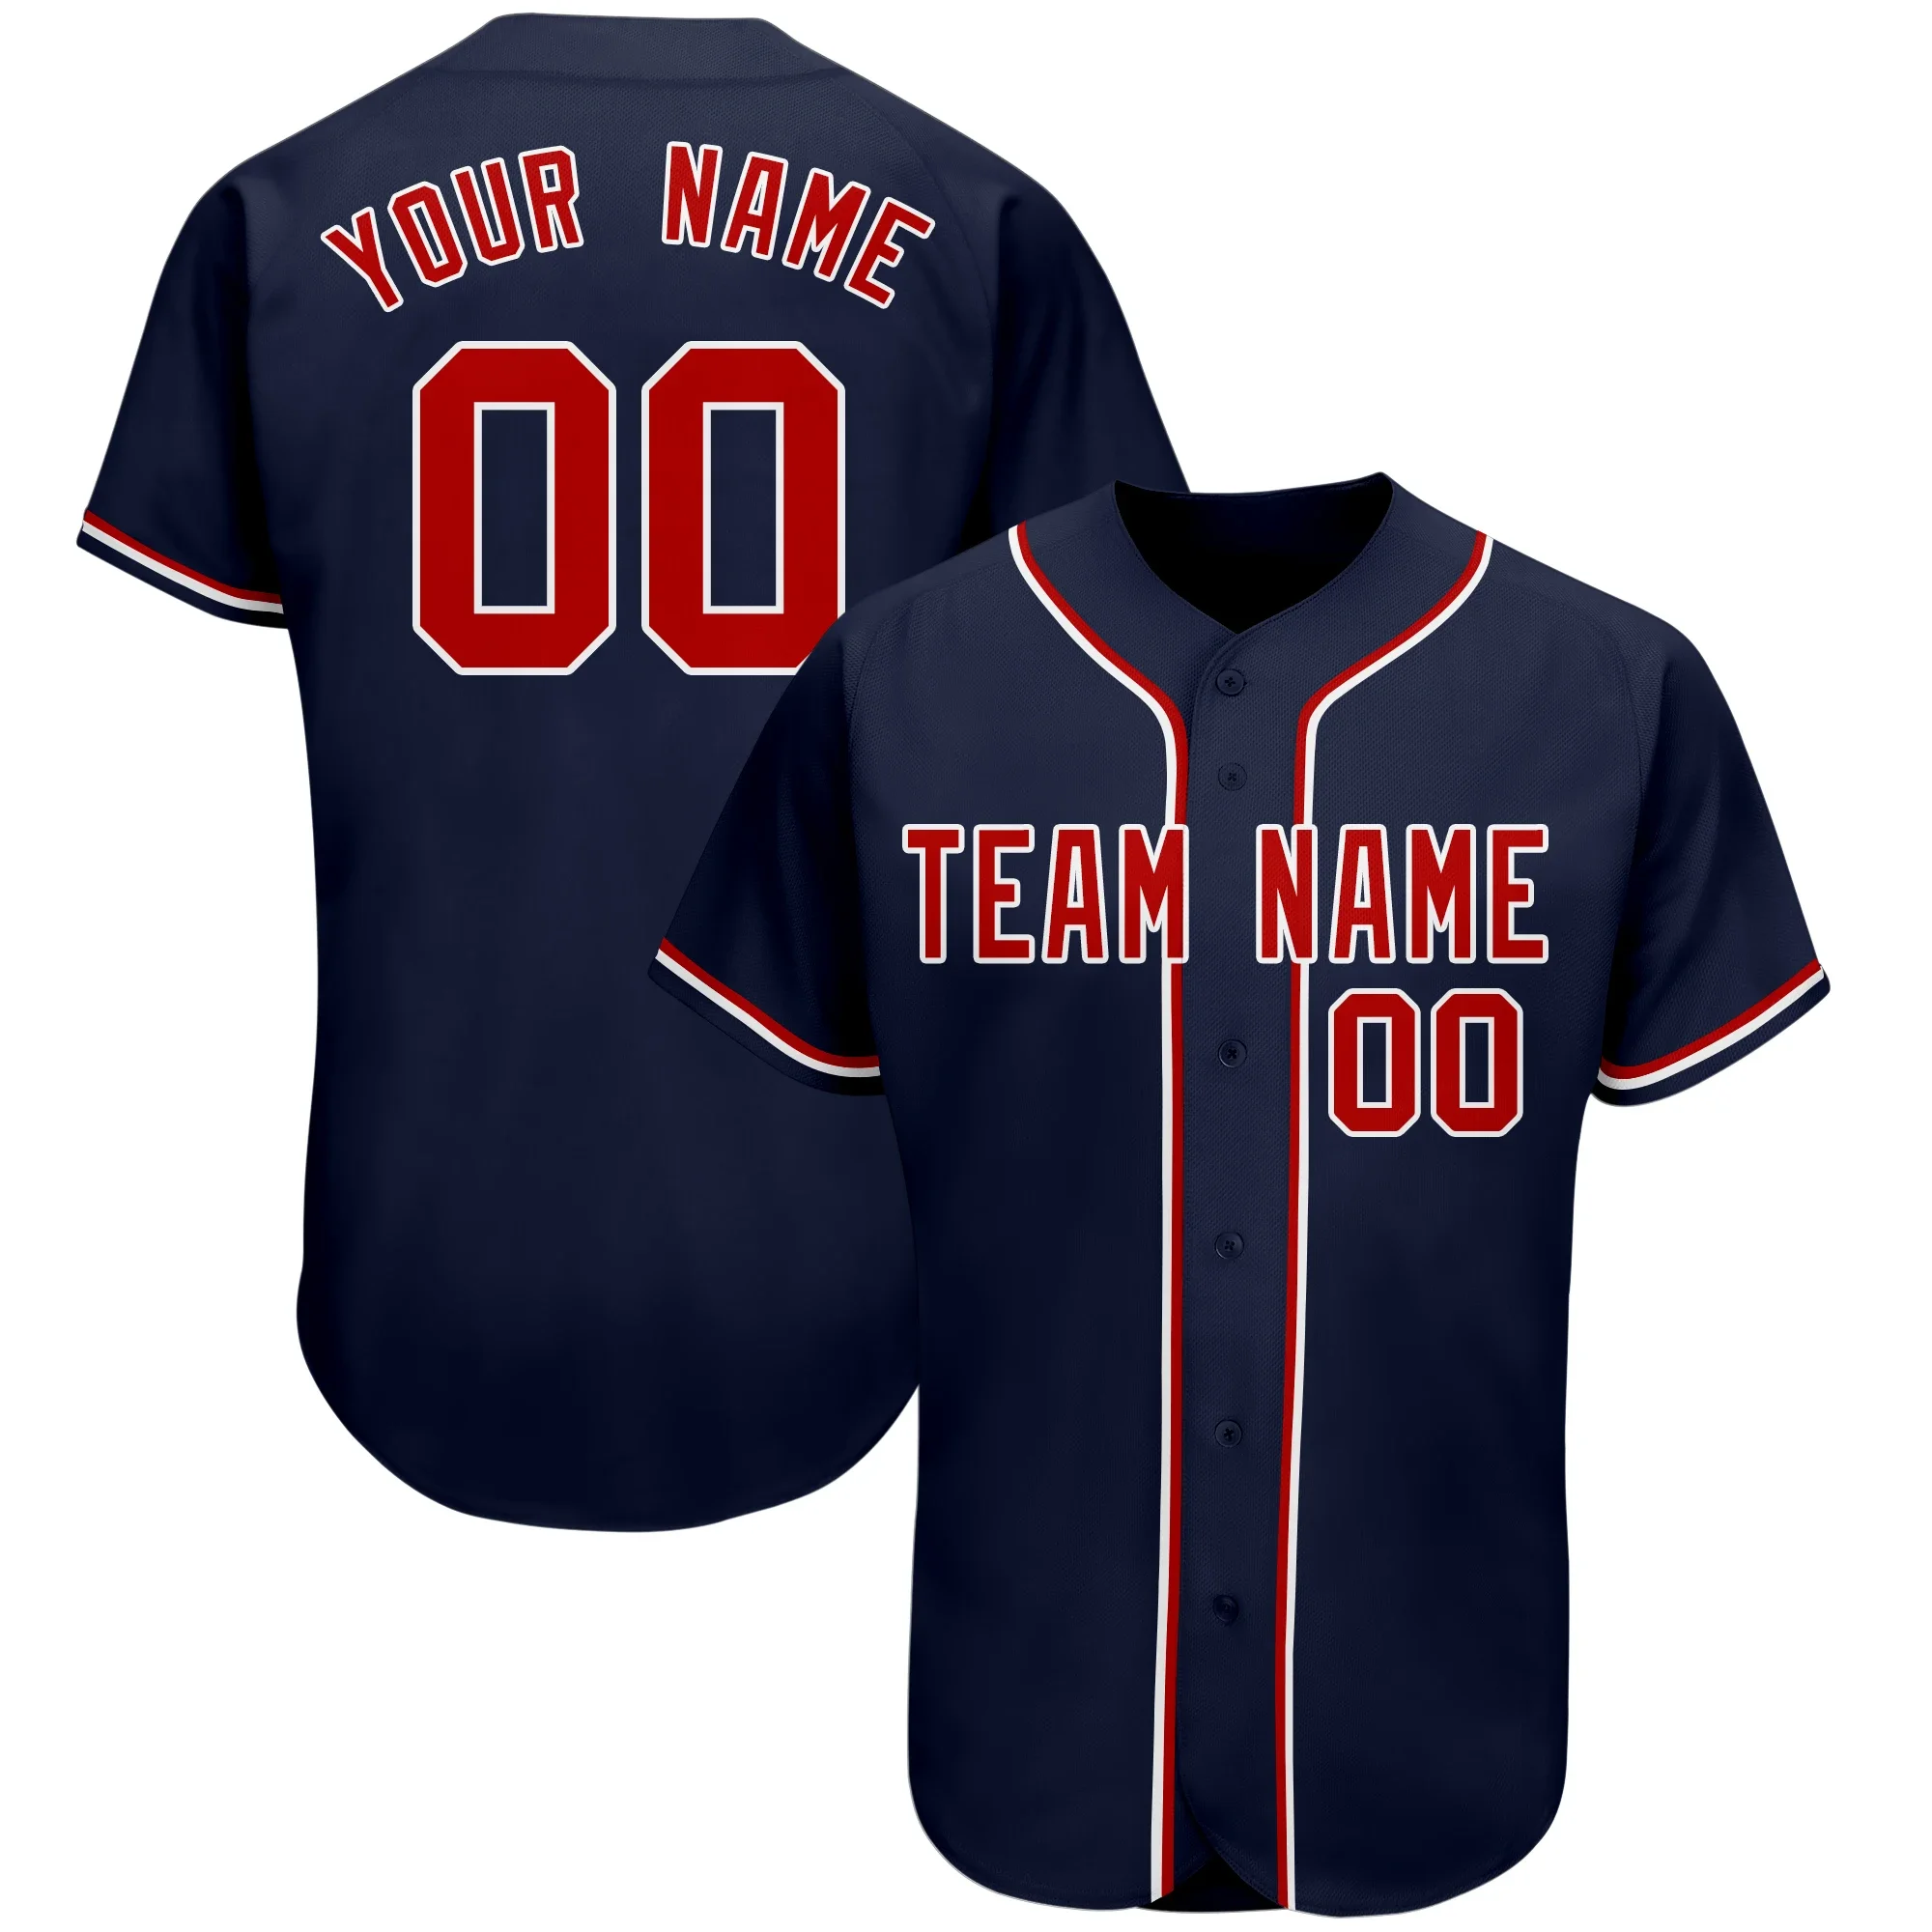 

Custom Baseball Jerseys Stitched Men Youth S-7XL, Personalized Your Name and Number, Button-Down Shirts for Fans Gifts